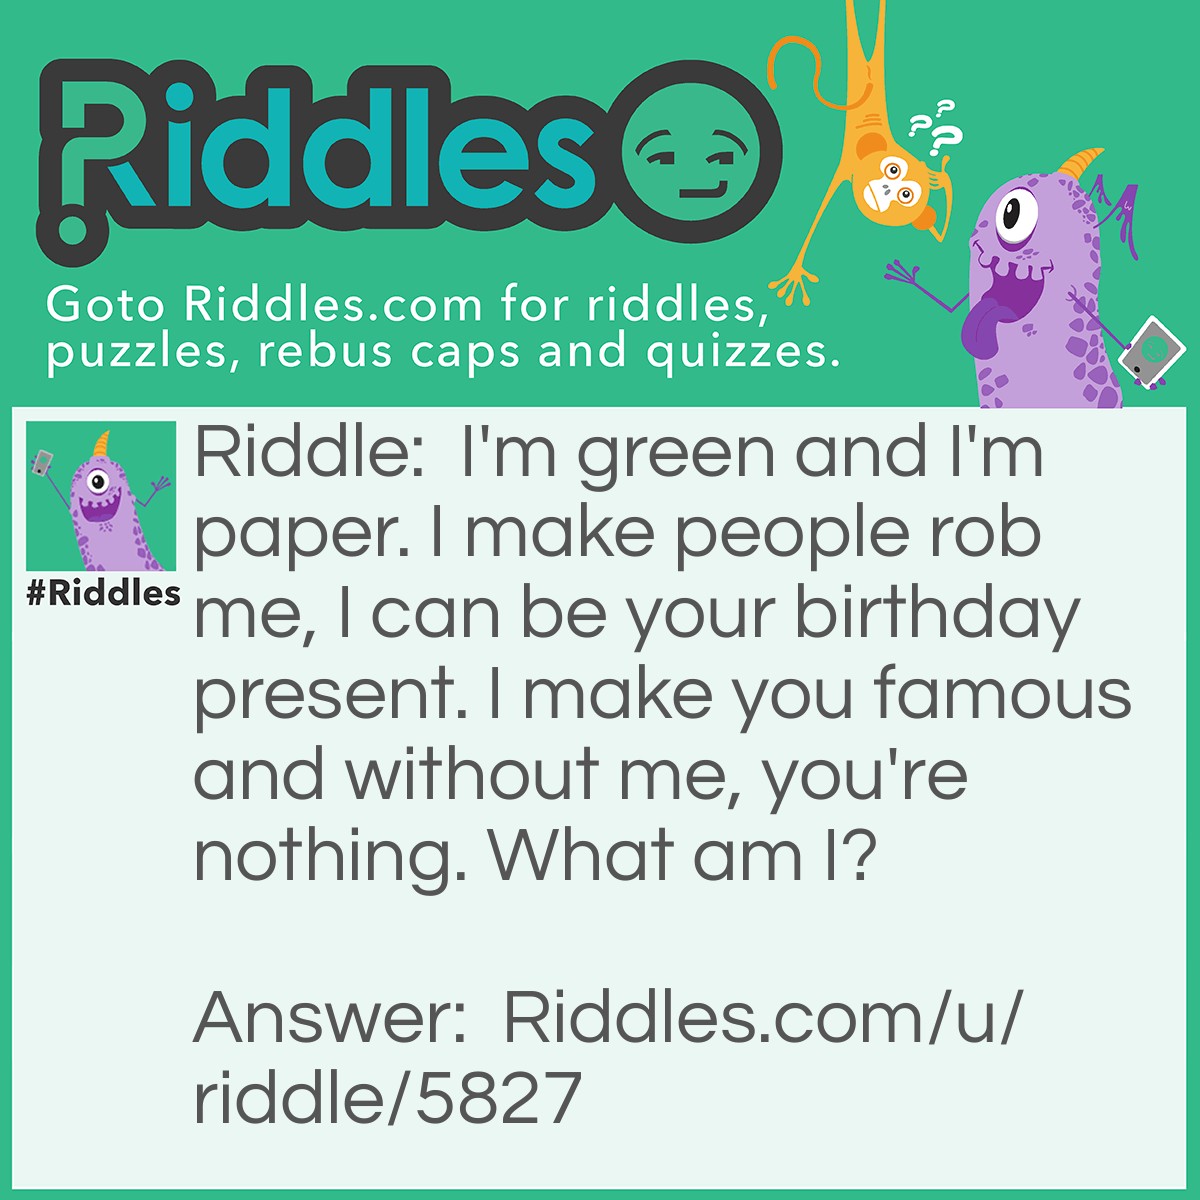 Riddle: I'm green and I'm paper. I make people rob me, I can be your birthday present. I make you famous and without me, you're nothing. What am I? Answer: Money.